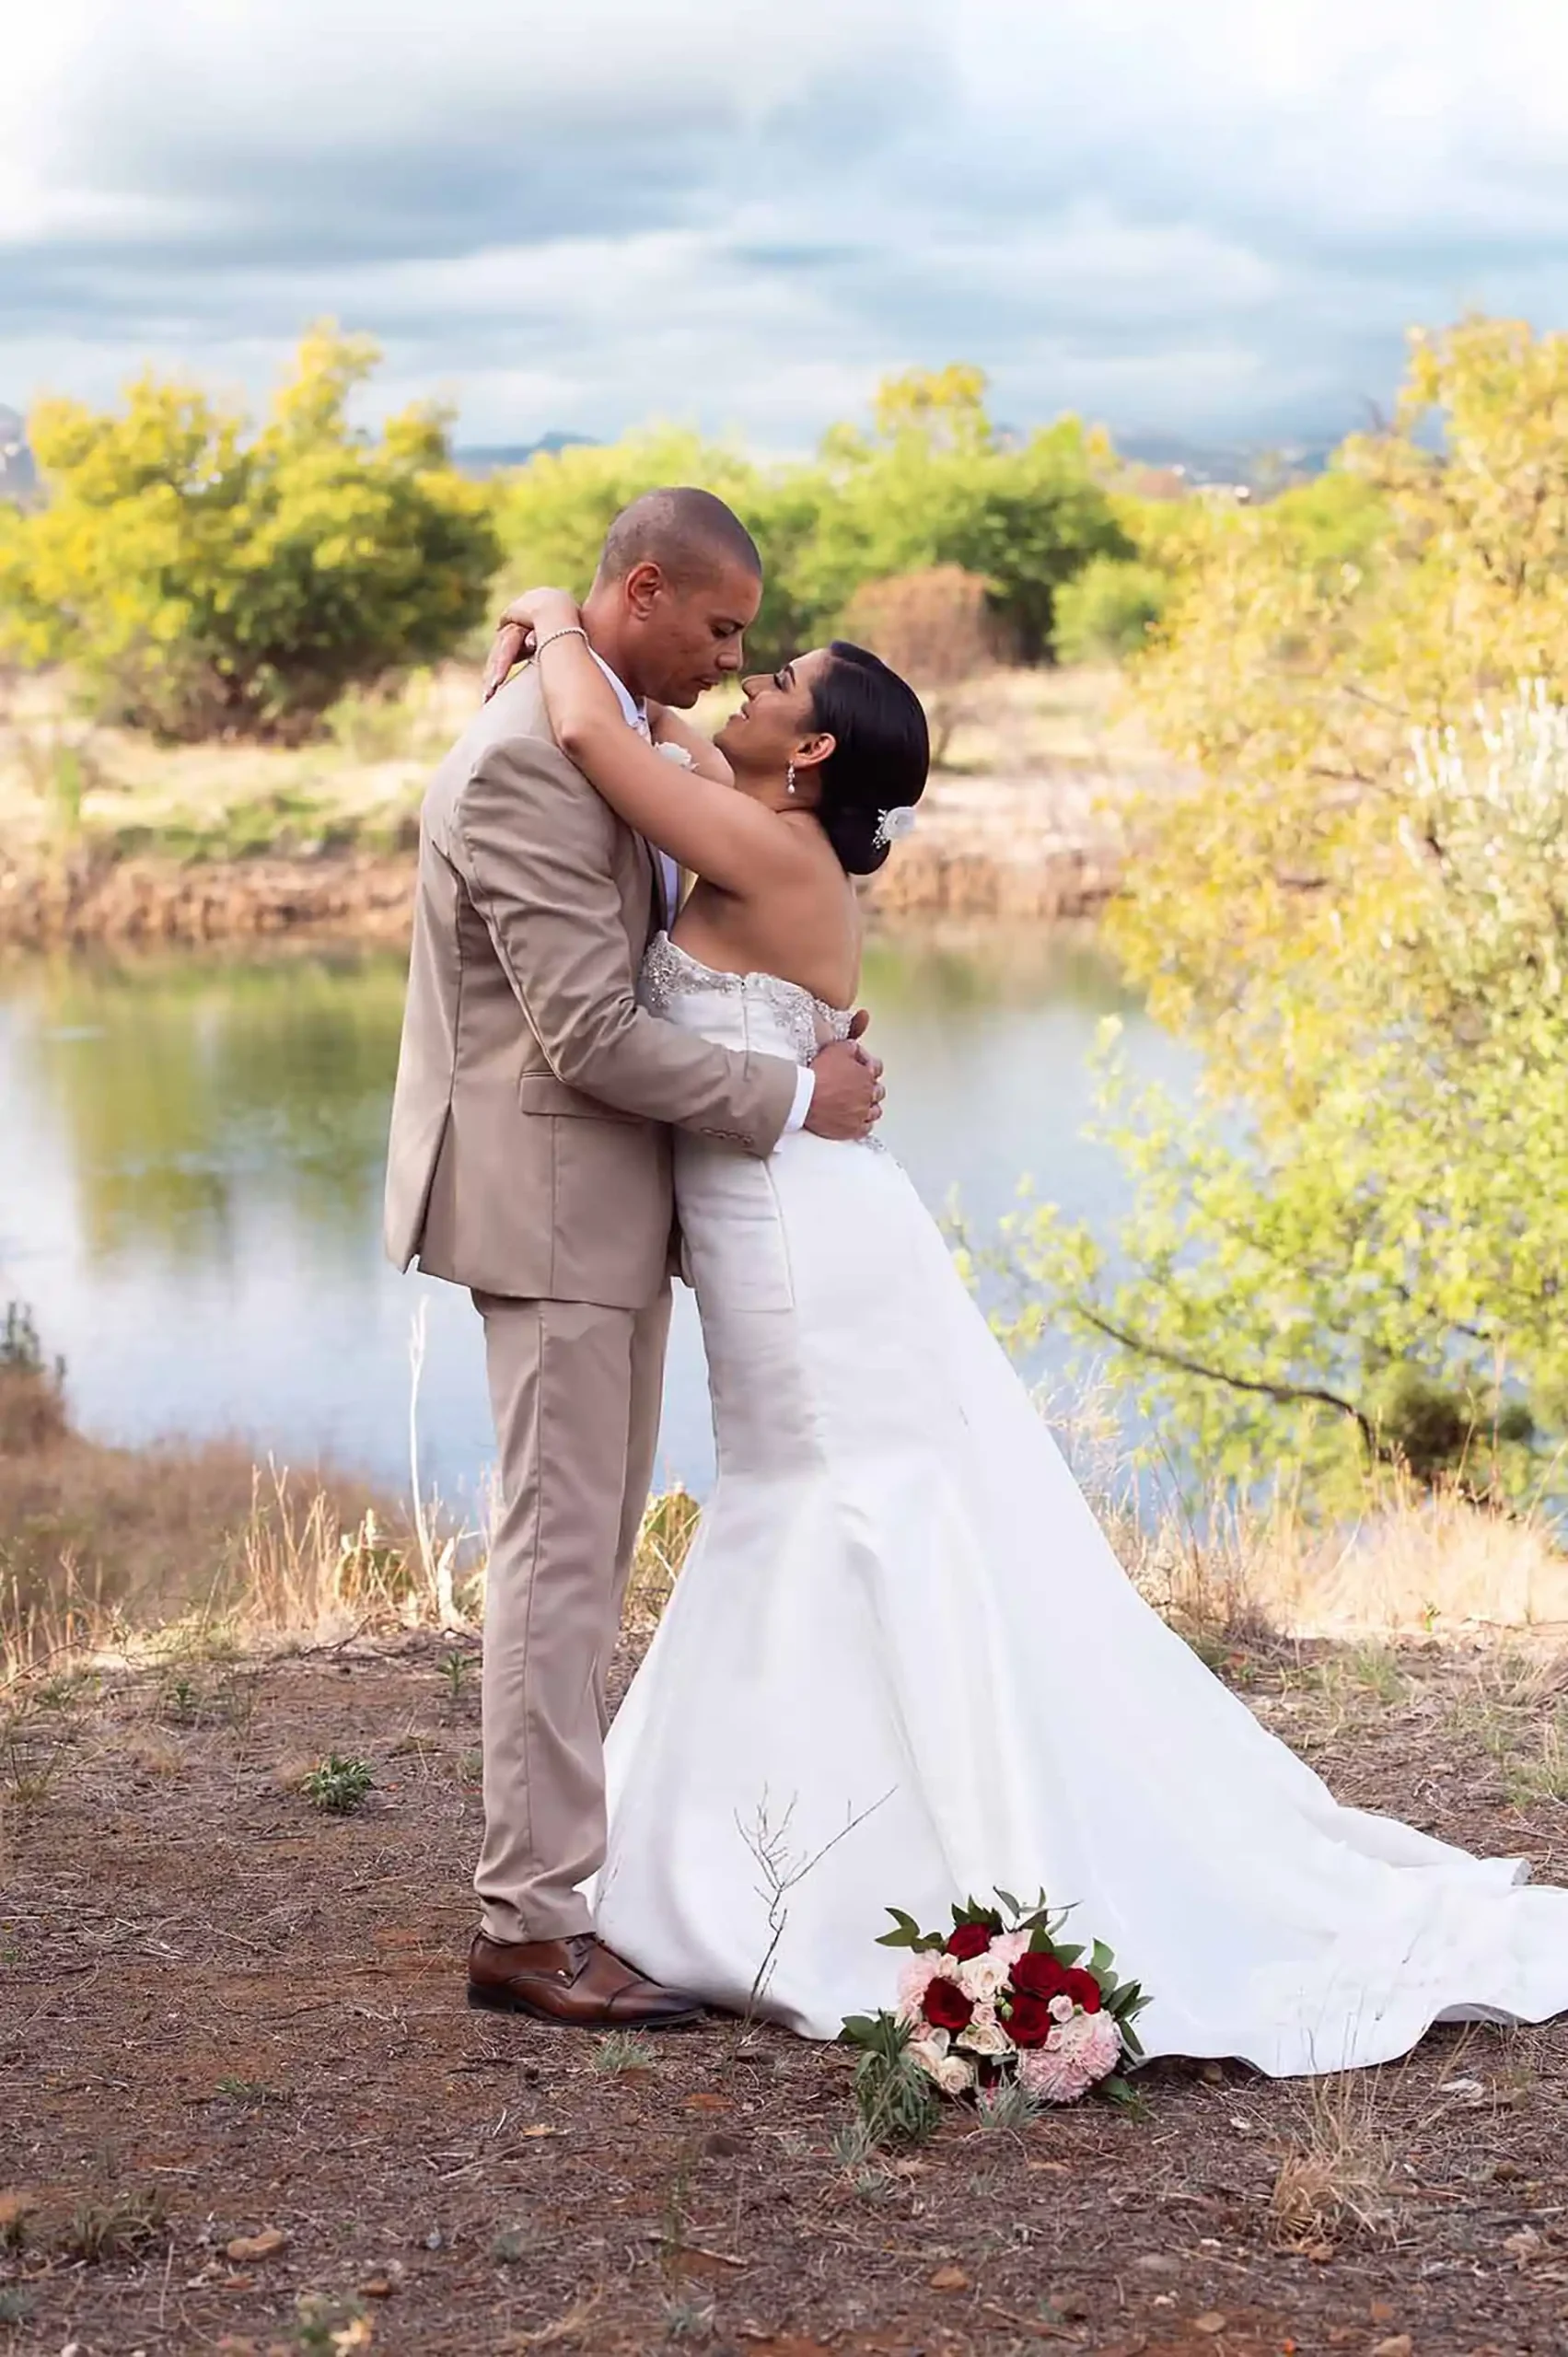 wedding photography bride and groom Bloemfontein leopards and lace mudboots photography